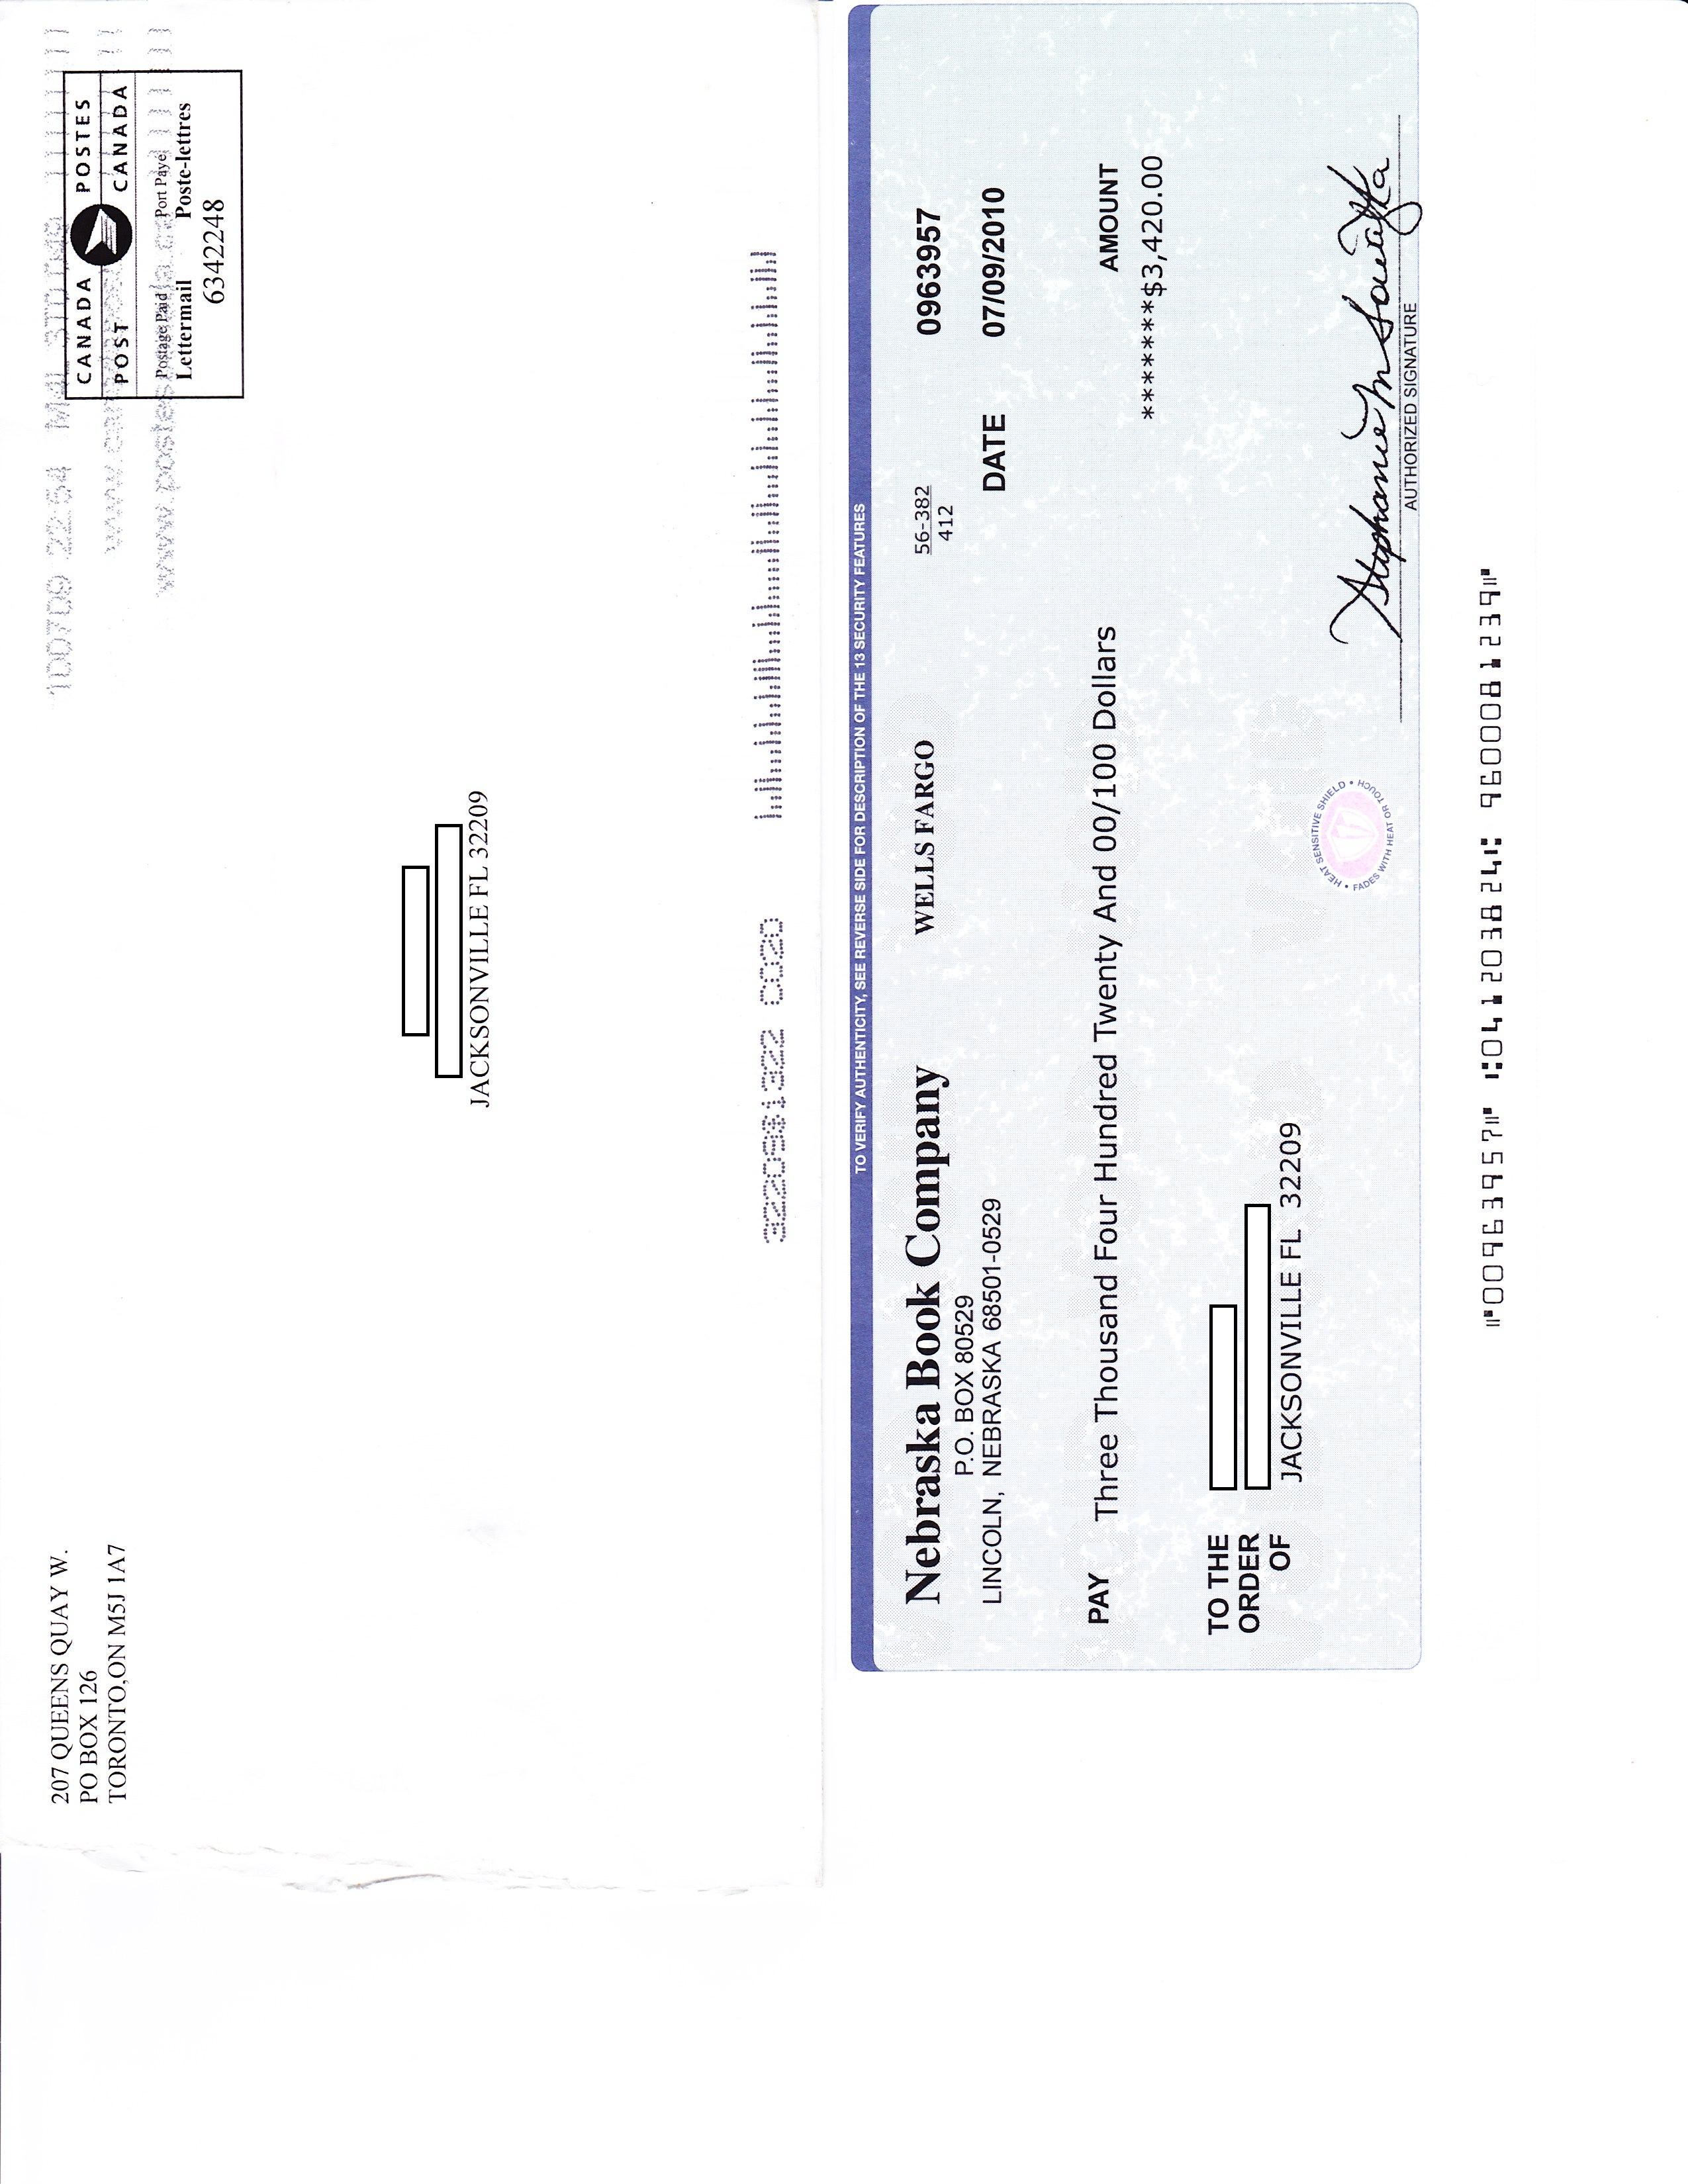 The check and envelope